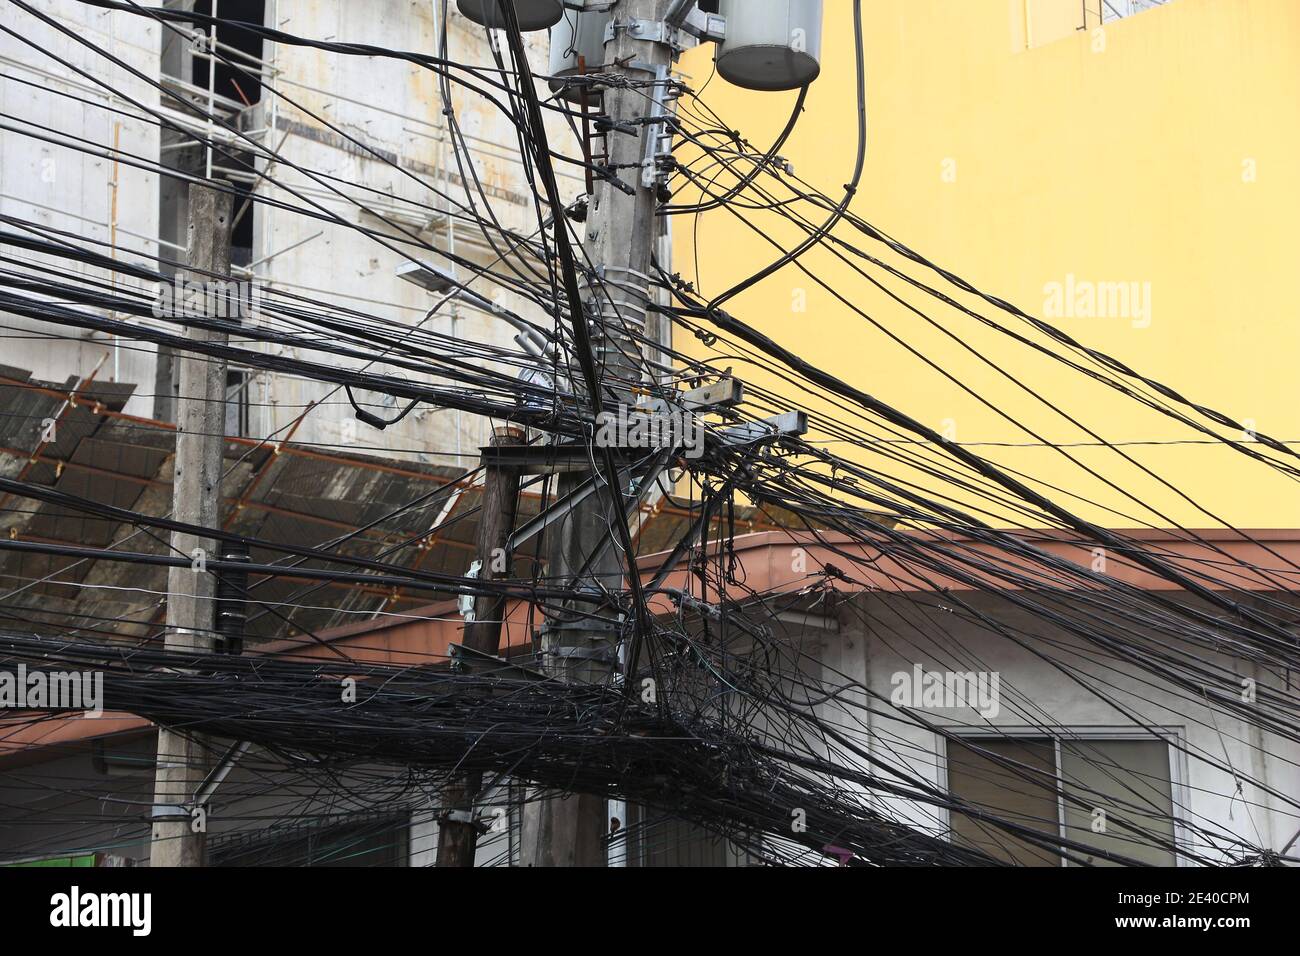 Messy cables and tangled wires - chaotic infrastructure of Manila, Philippines. Asian city cable chaos. Stock Photo